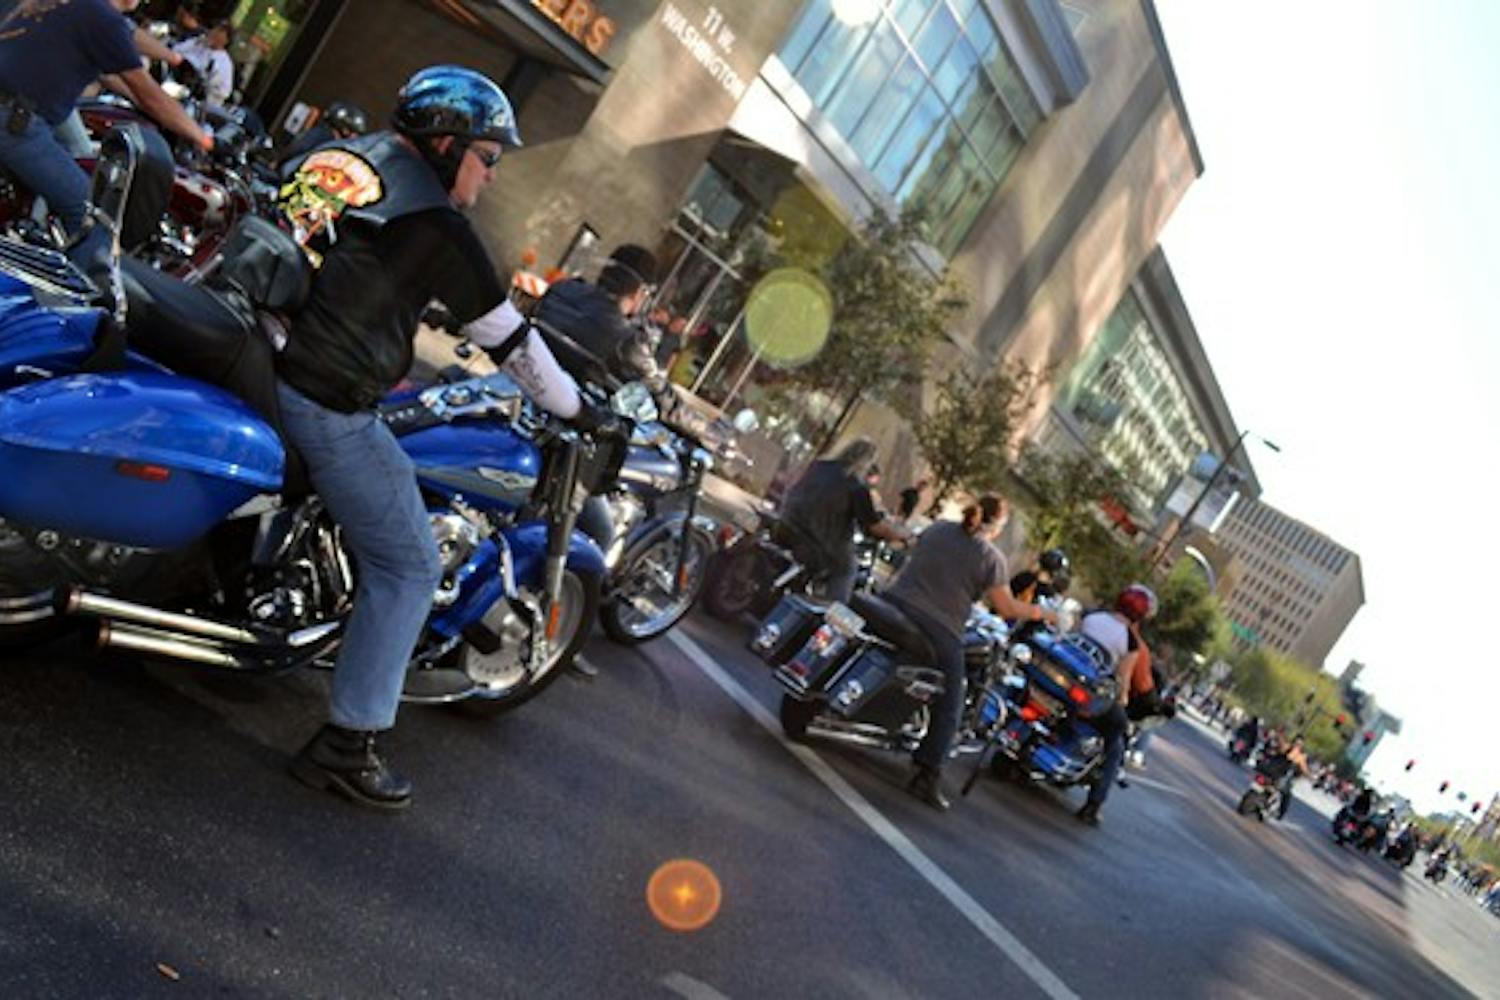 Motorcyclists stop at a light blocks away from the finish line of the Arizona Centennial Ride Saturday afternoon in downtown Phoenix. (Photo by Brittany Lea)